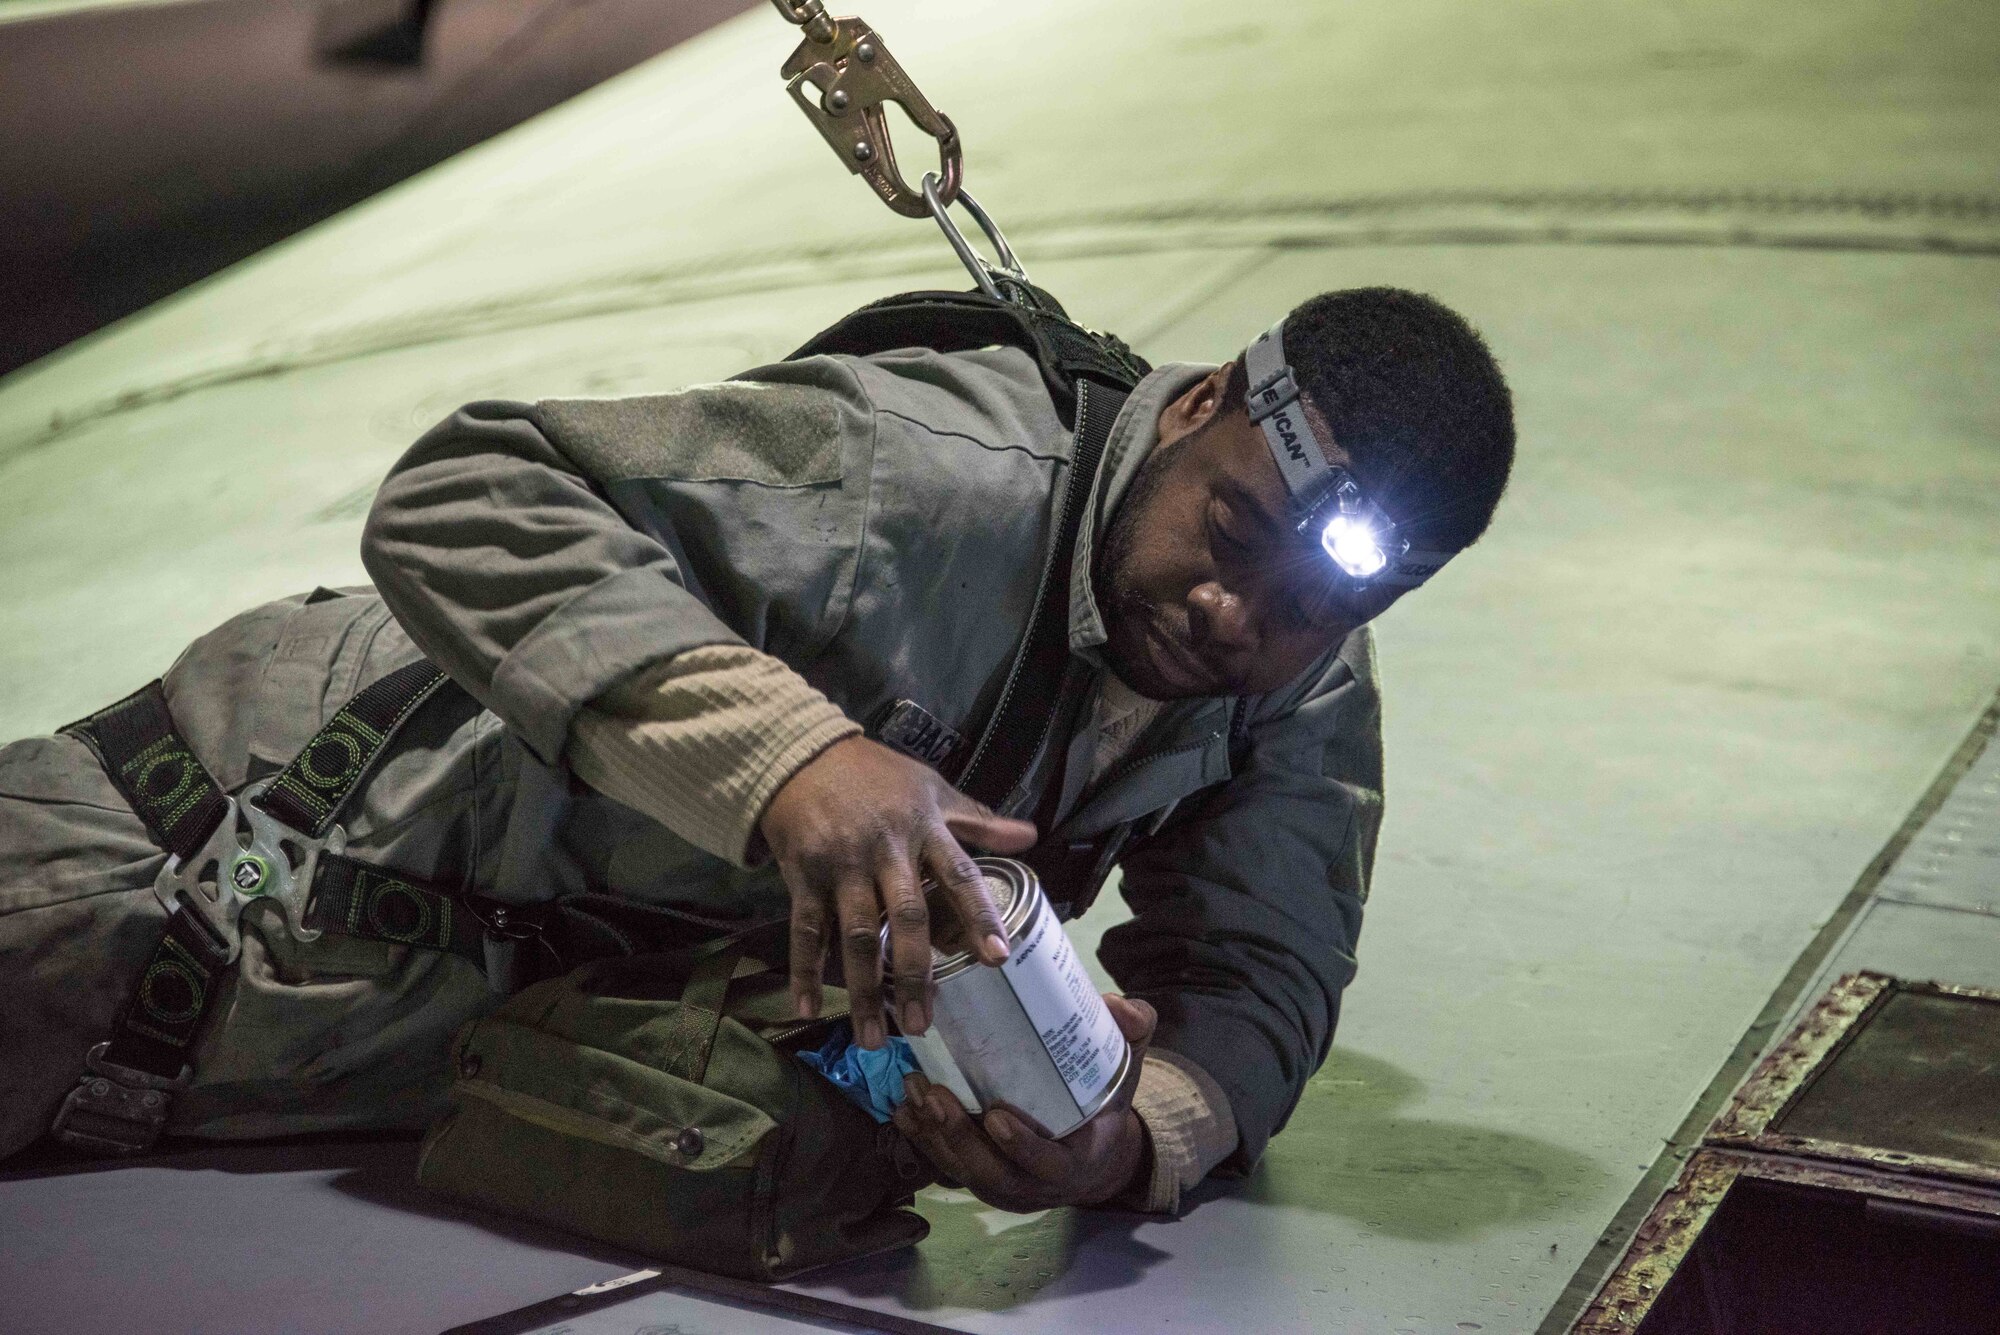 U.S. Air Force Master Sgt. Eugene Jackson of the 166th Maintenance Squadron fuel systems maintenance shop, Delaware Air National Guard, prepares to reseal a leaky fuel system access door on top of the right wing of a C-130H2 aircraft. Because fuel system maintainers have to work in high places, they are required to clip into a safety harness. (Courtesy Photo)